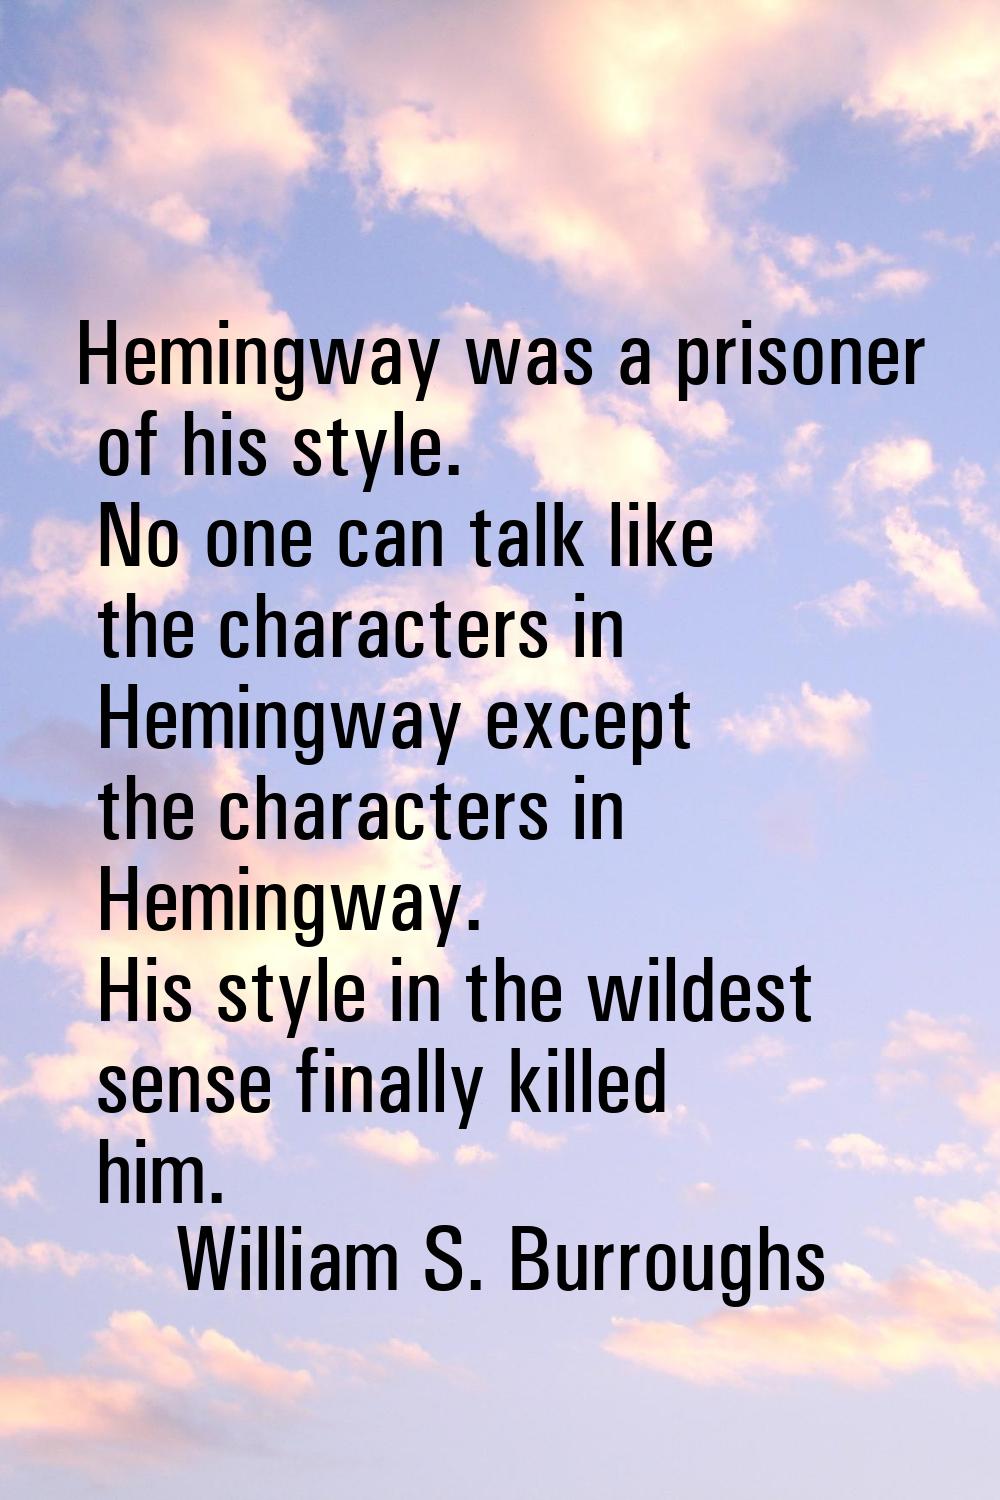 Hemingway was a prisoner of his style. No one can talk like the characters in Hemingway except the 